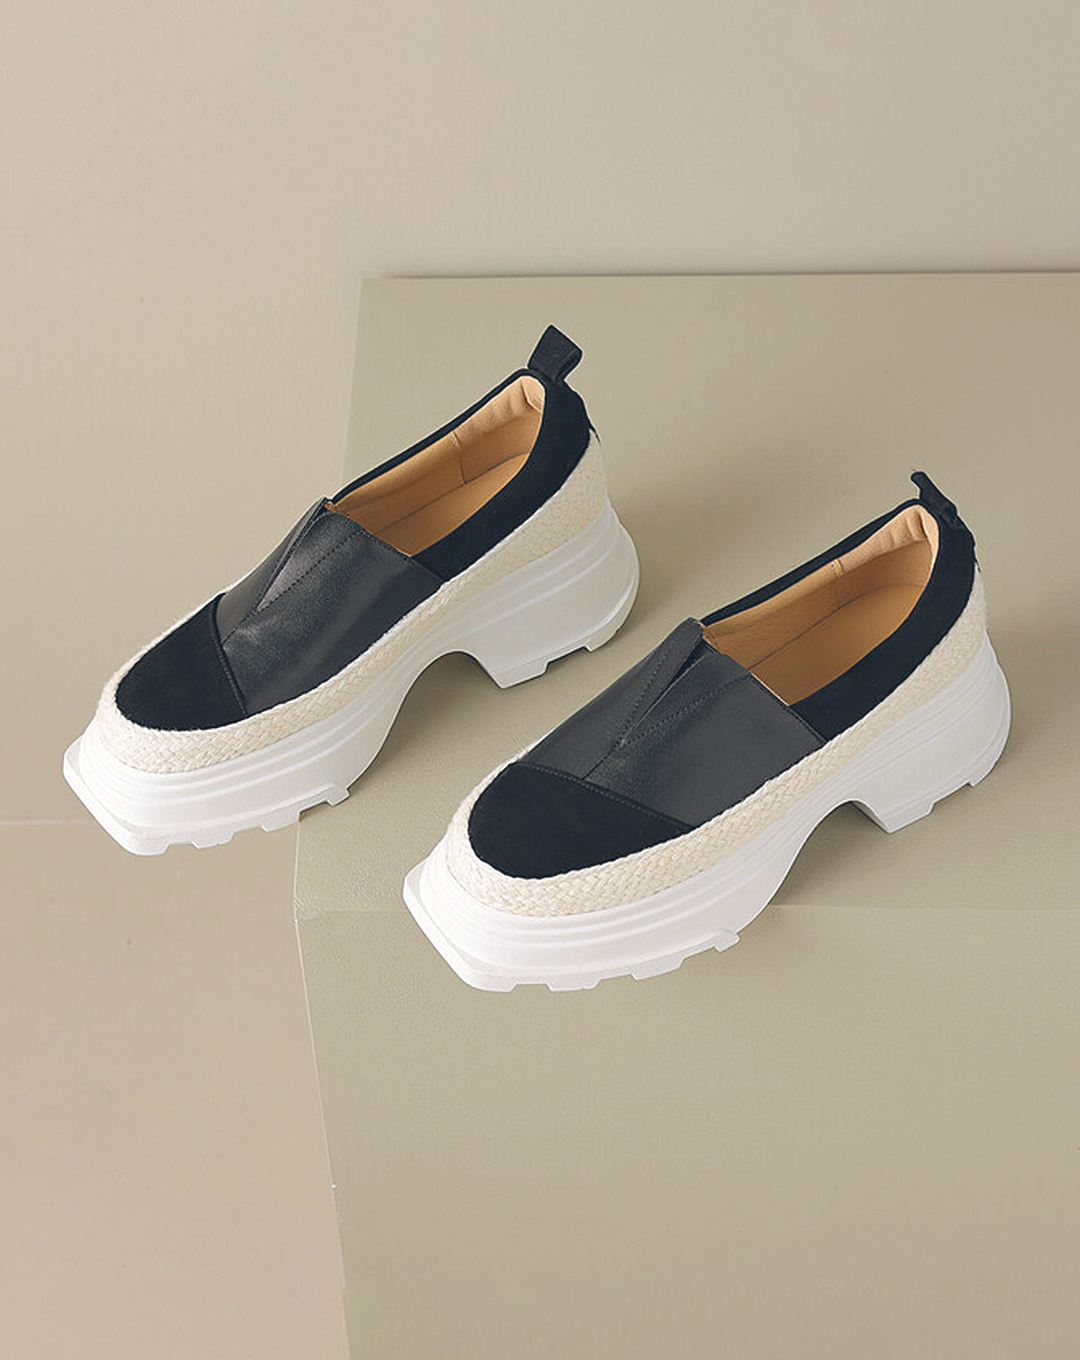 ♀Leather and Jute Platform Slip-on Shoes